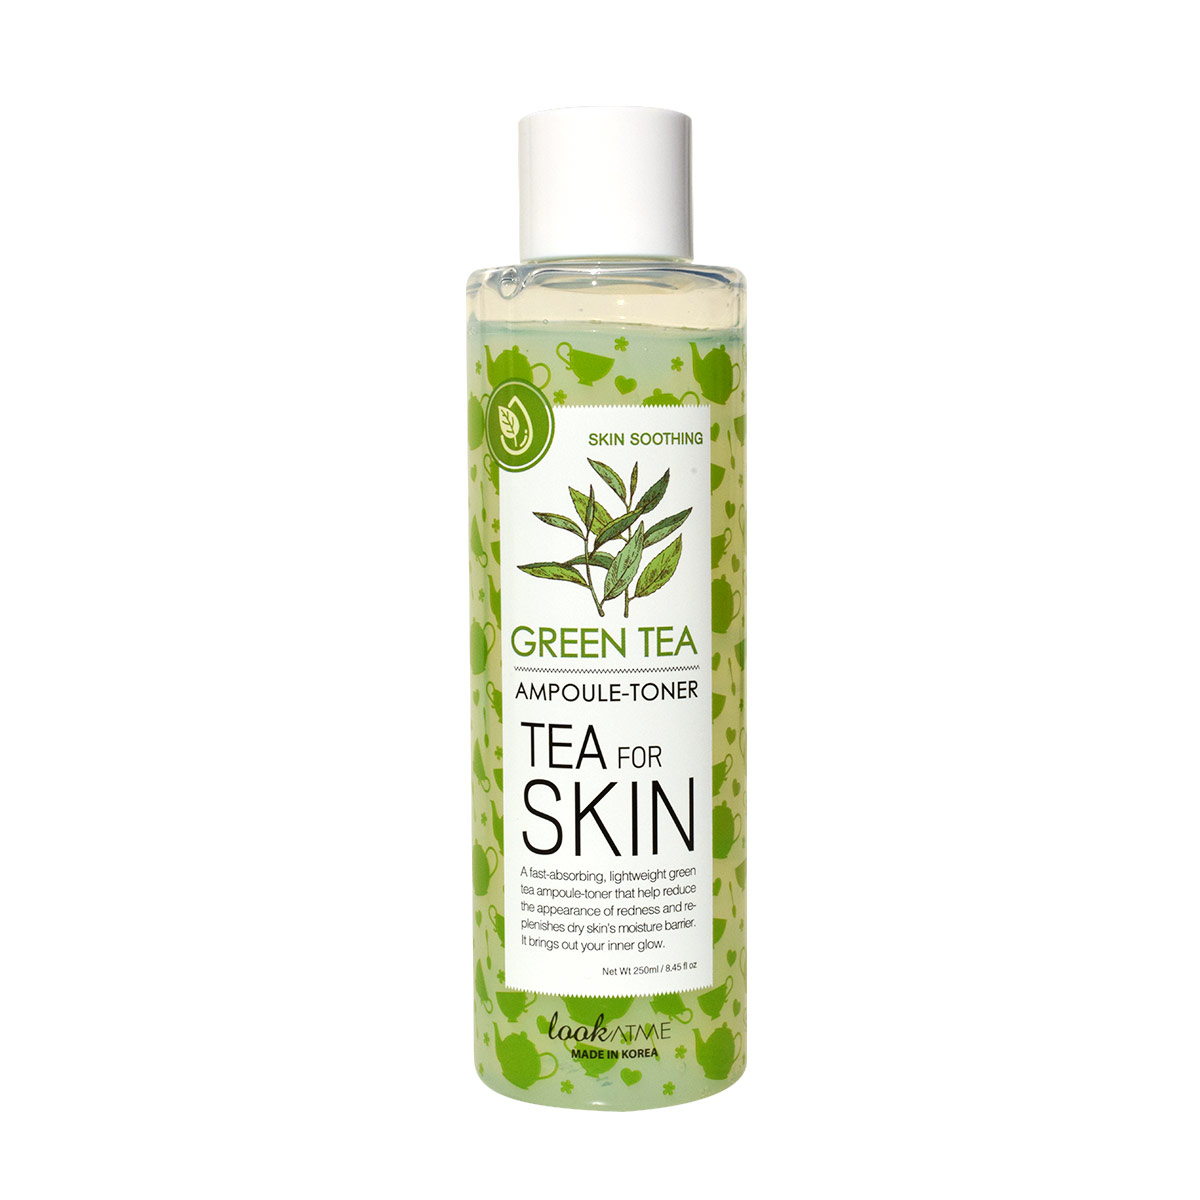 SKIN SOOTHING GREEN TEA AMPOULE TONER